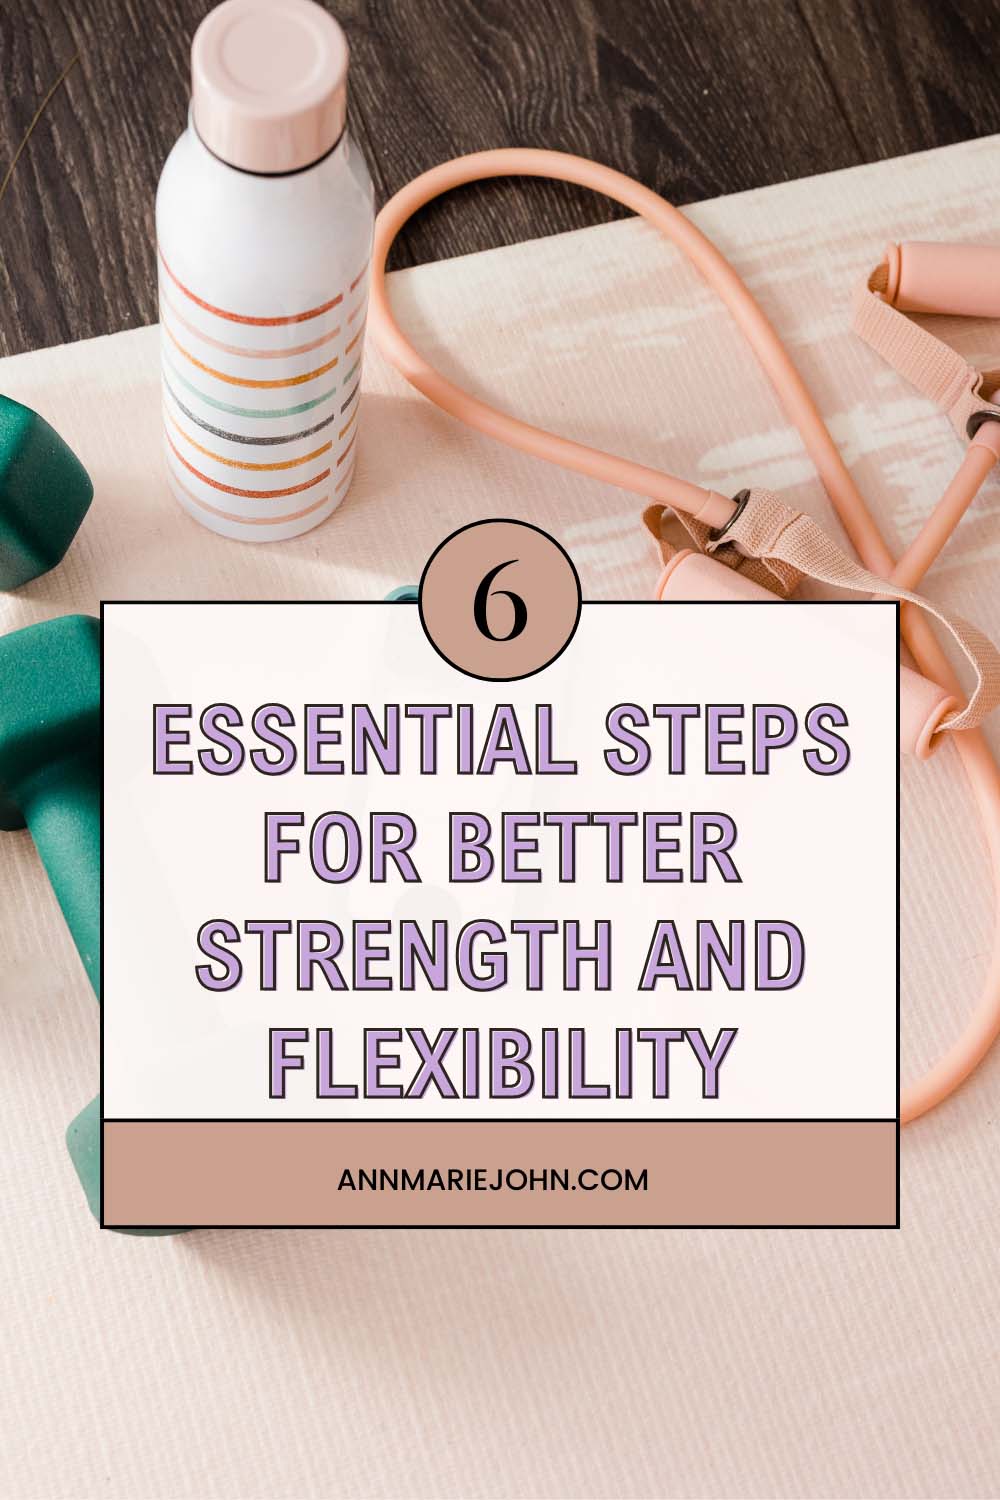 6 Essential Steps for Better Strength and Flexibility